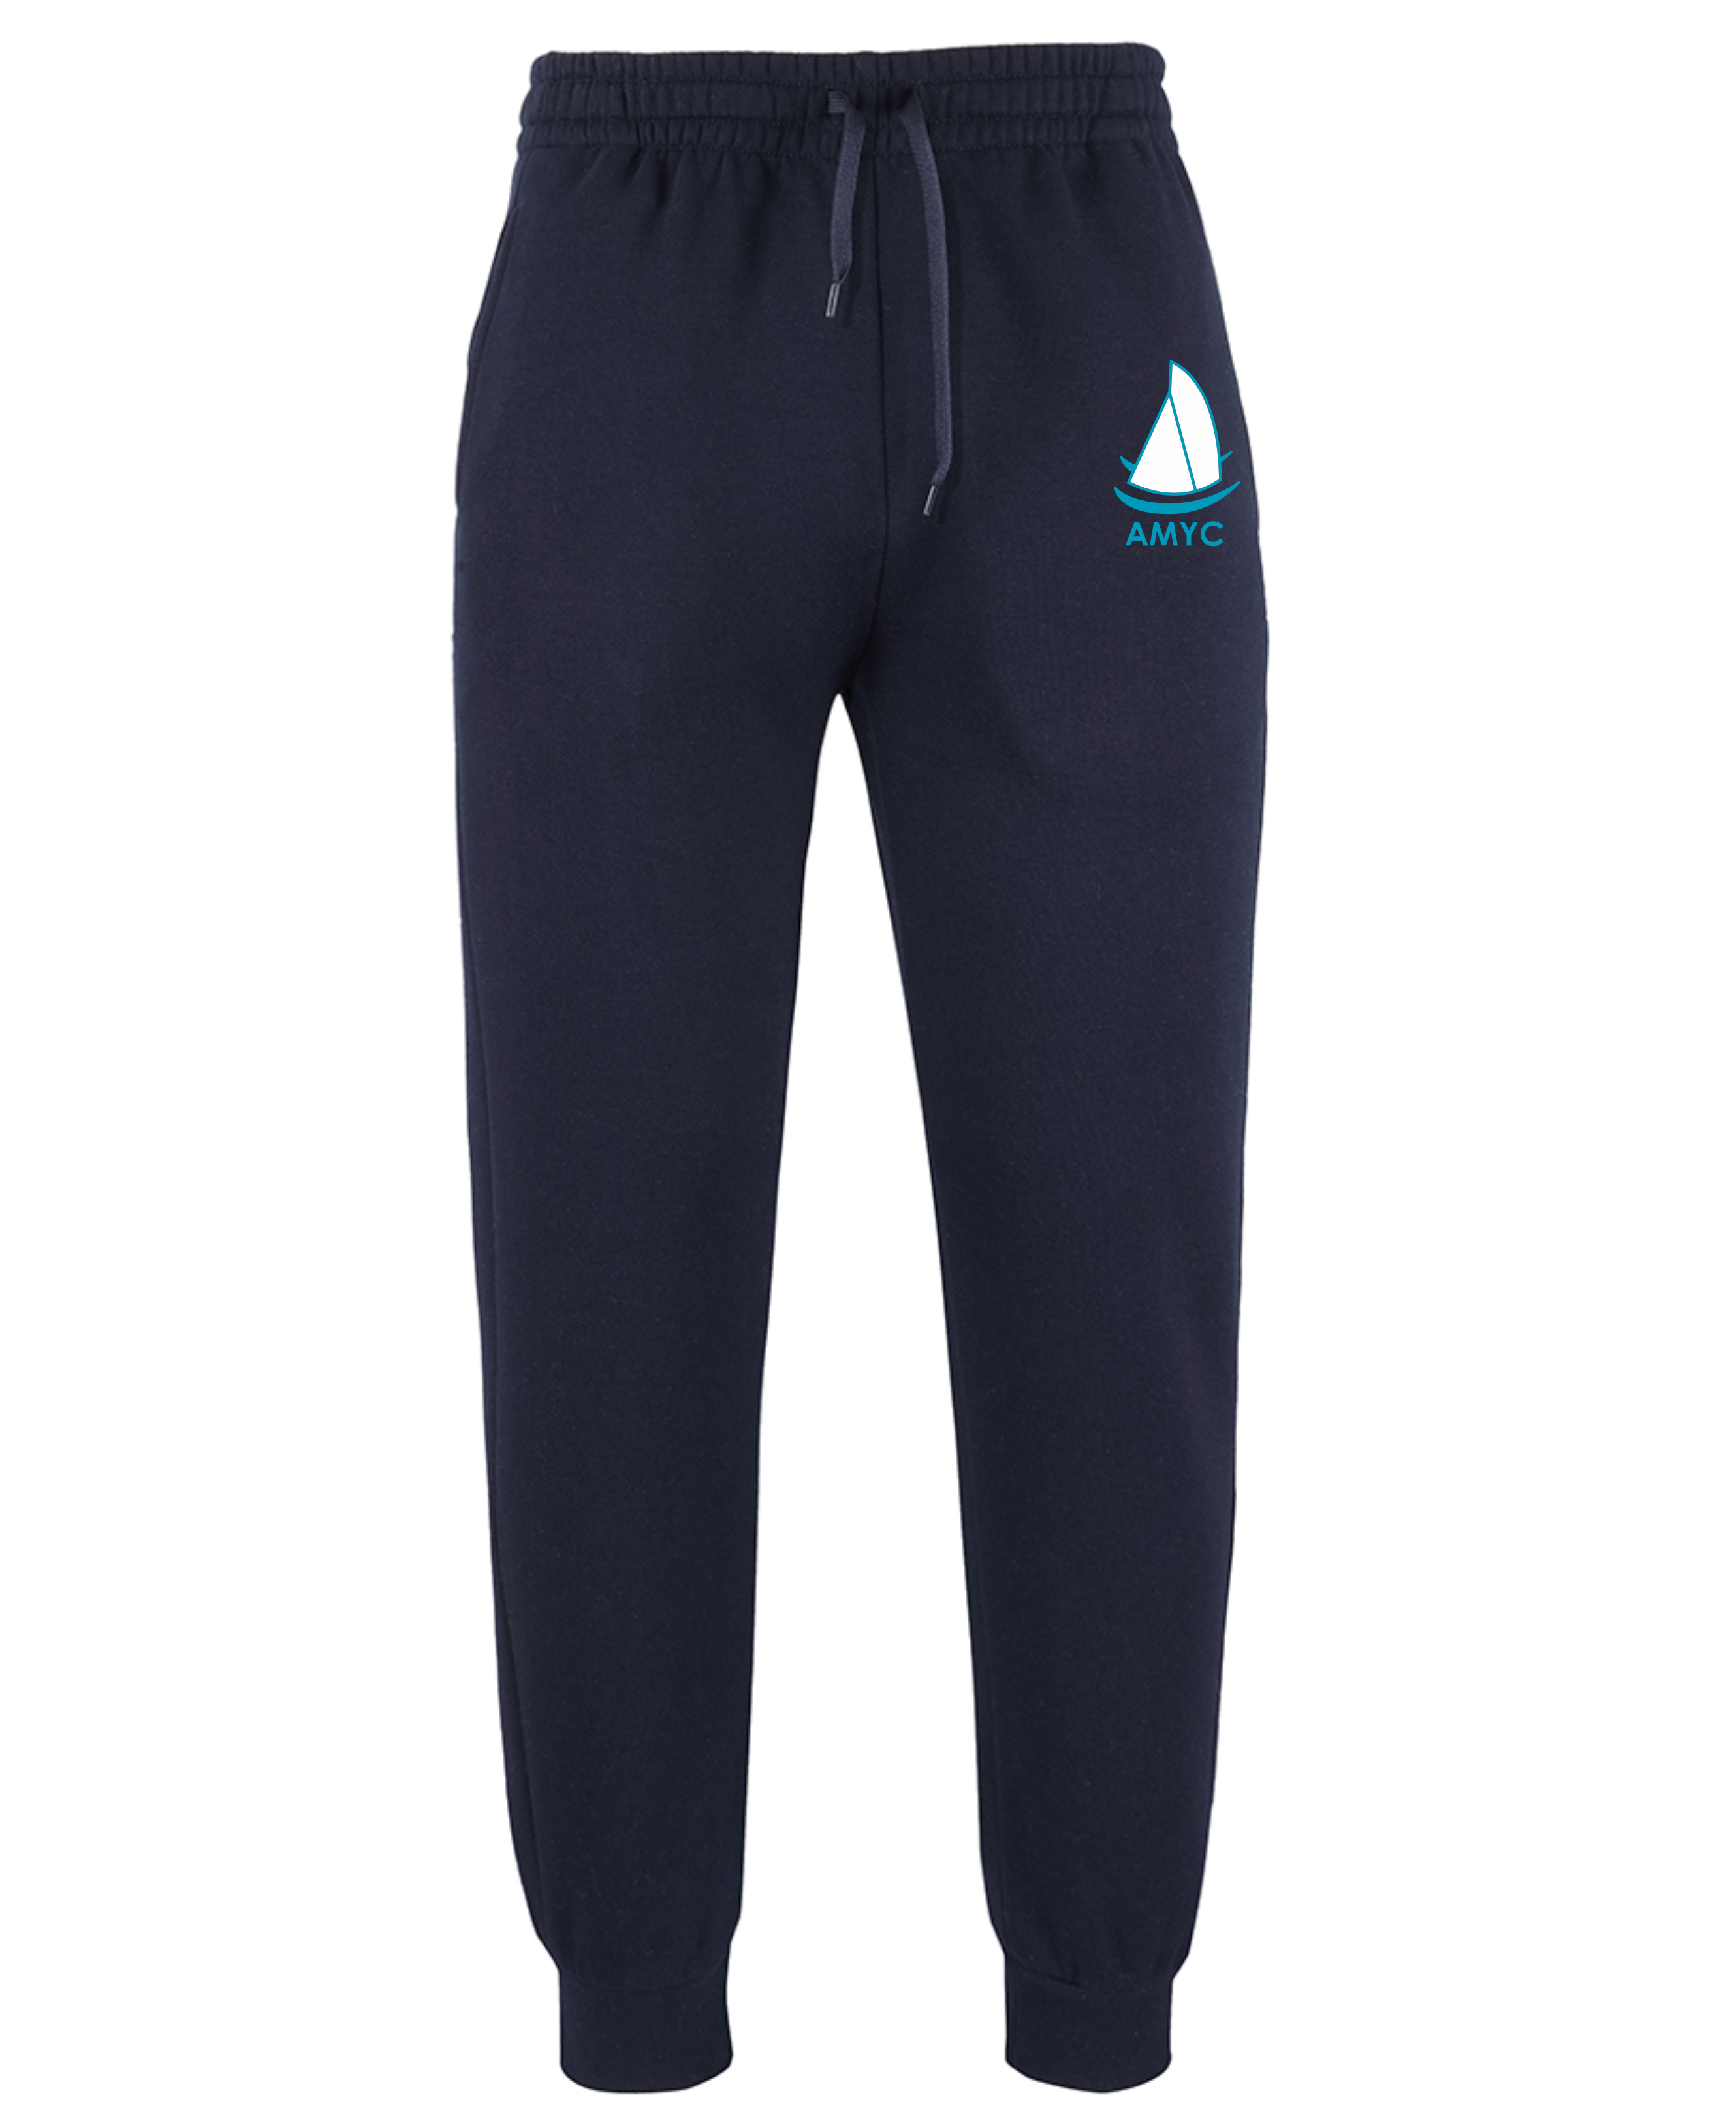 Navy Cuffed Track Pant